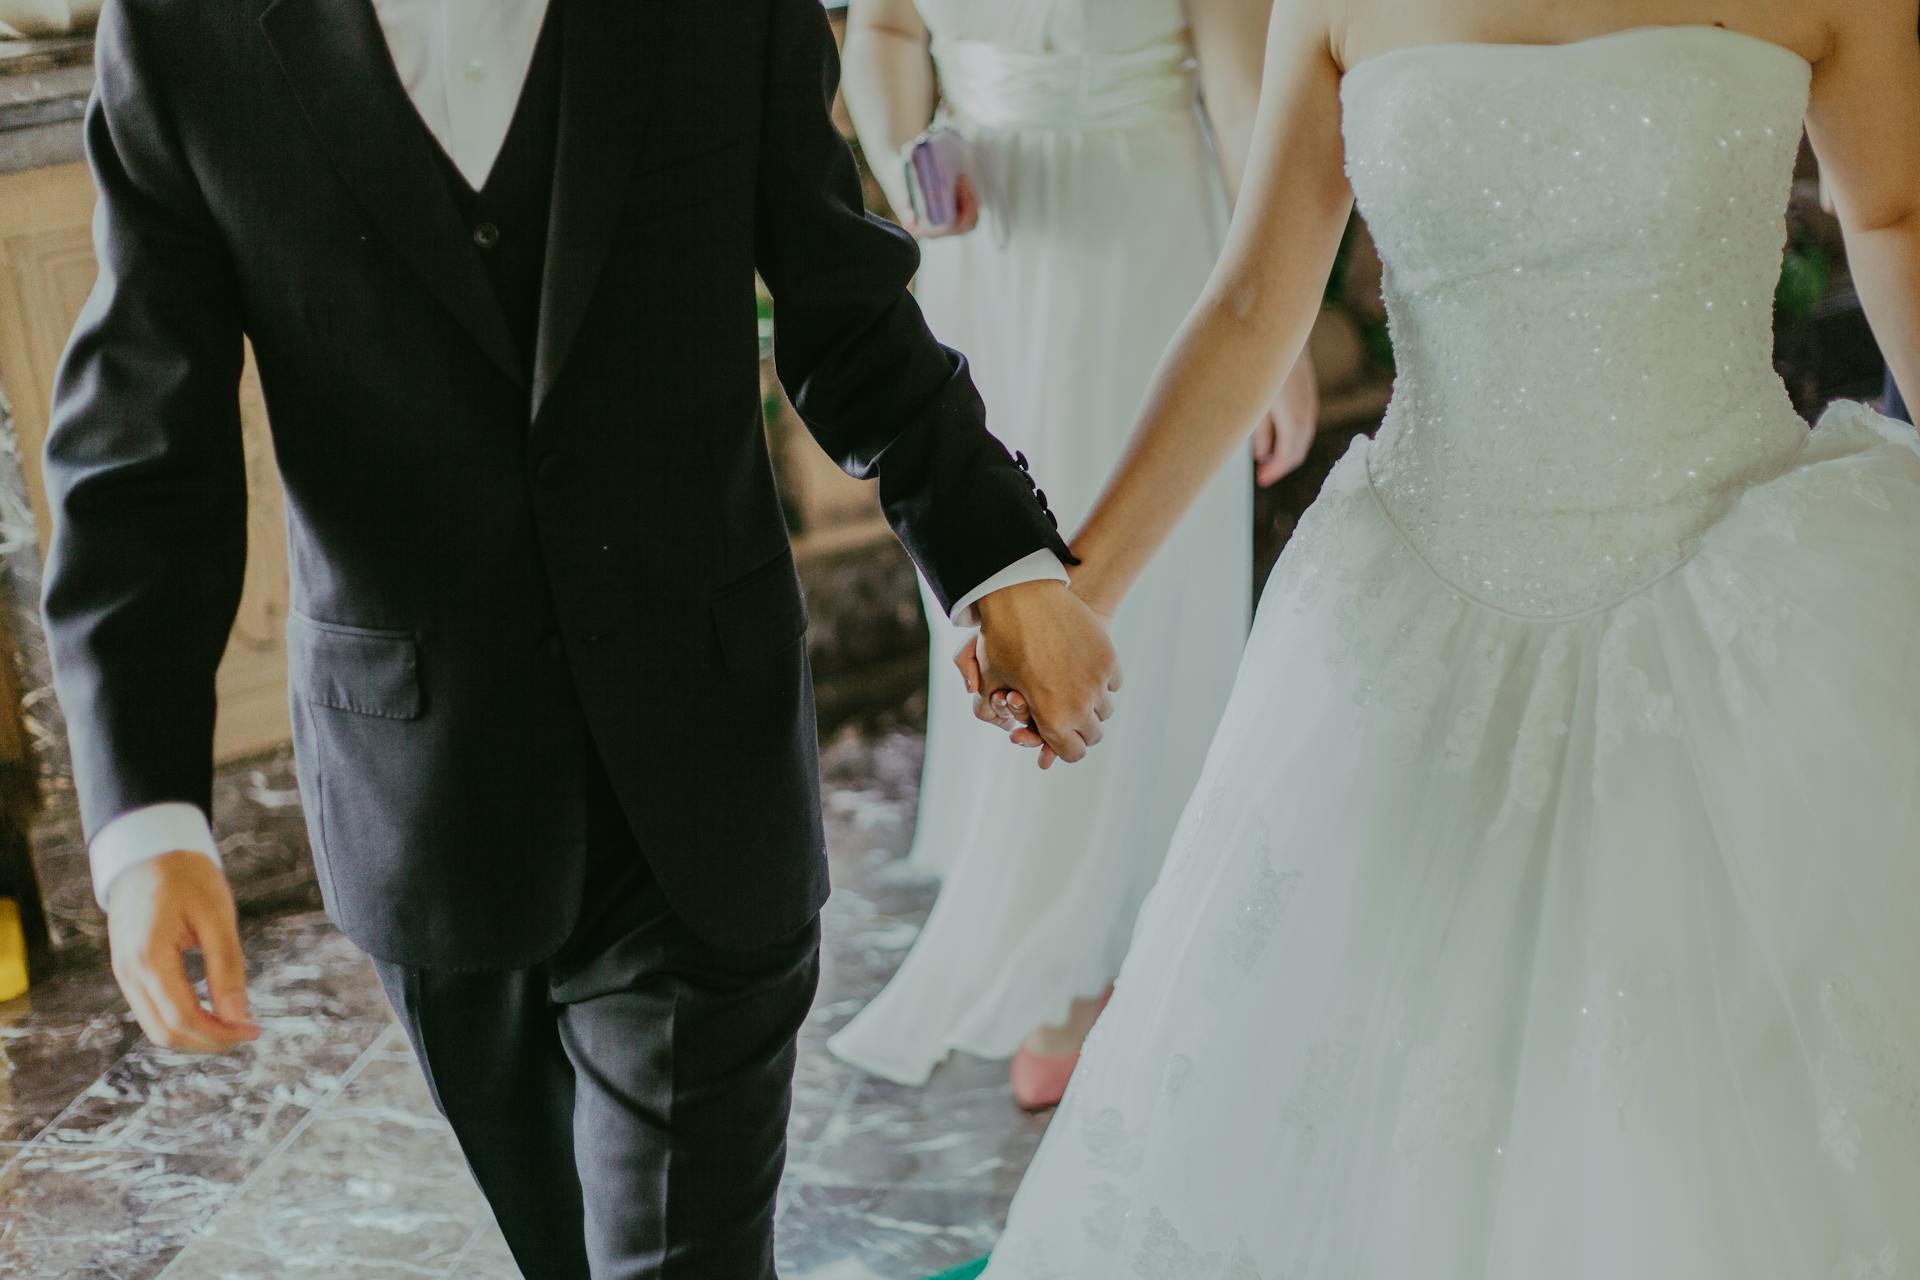 A bridal couple holding hands | Source: Pexels